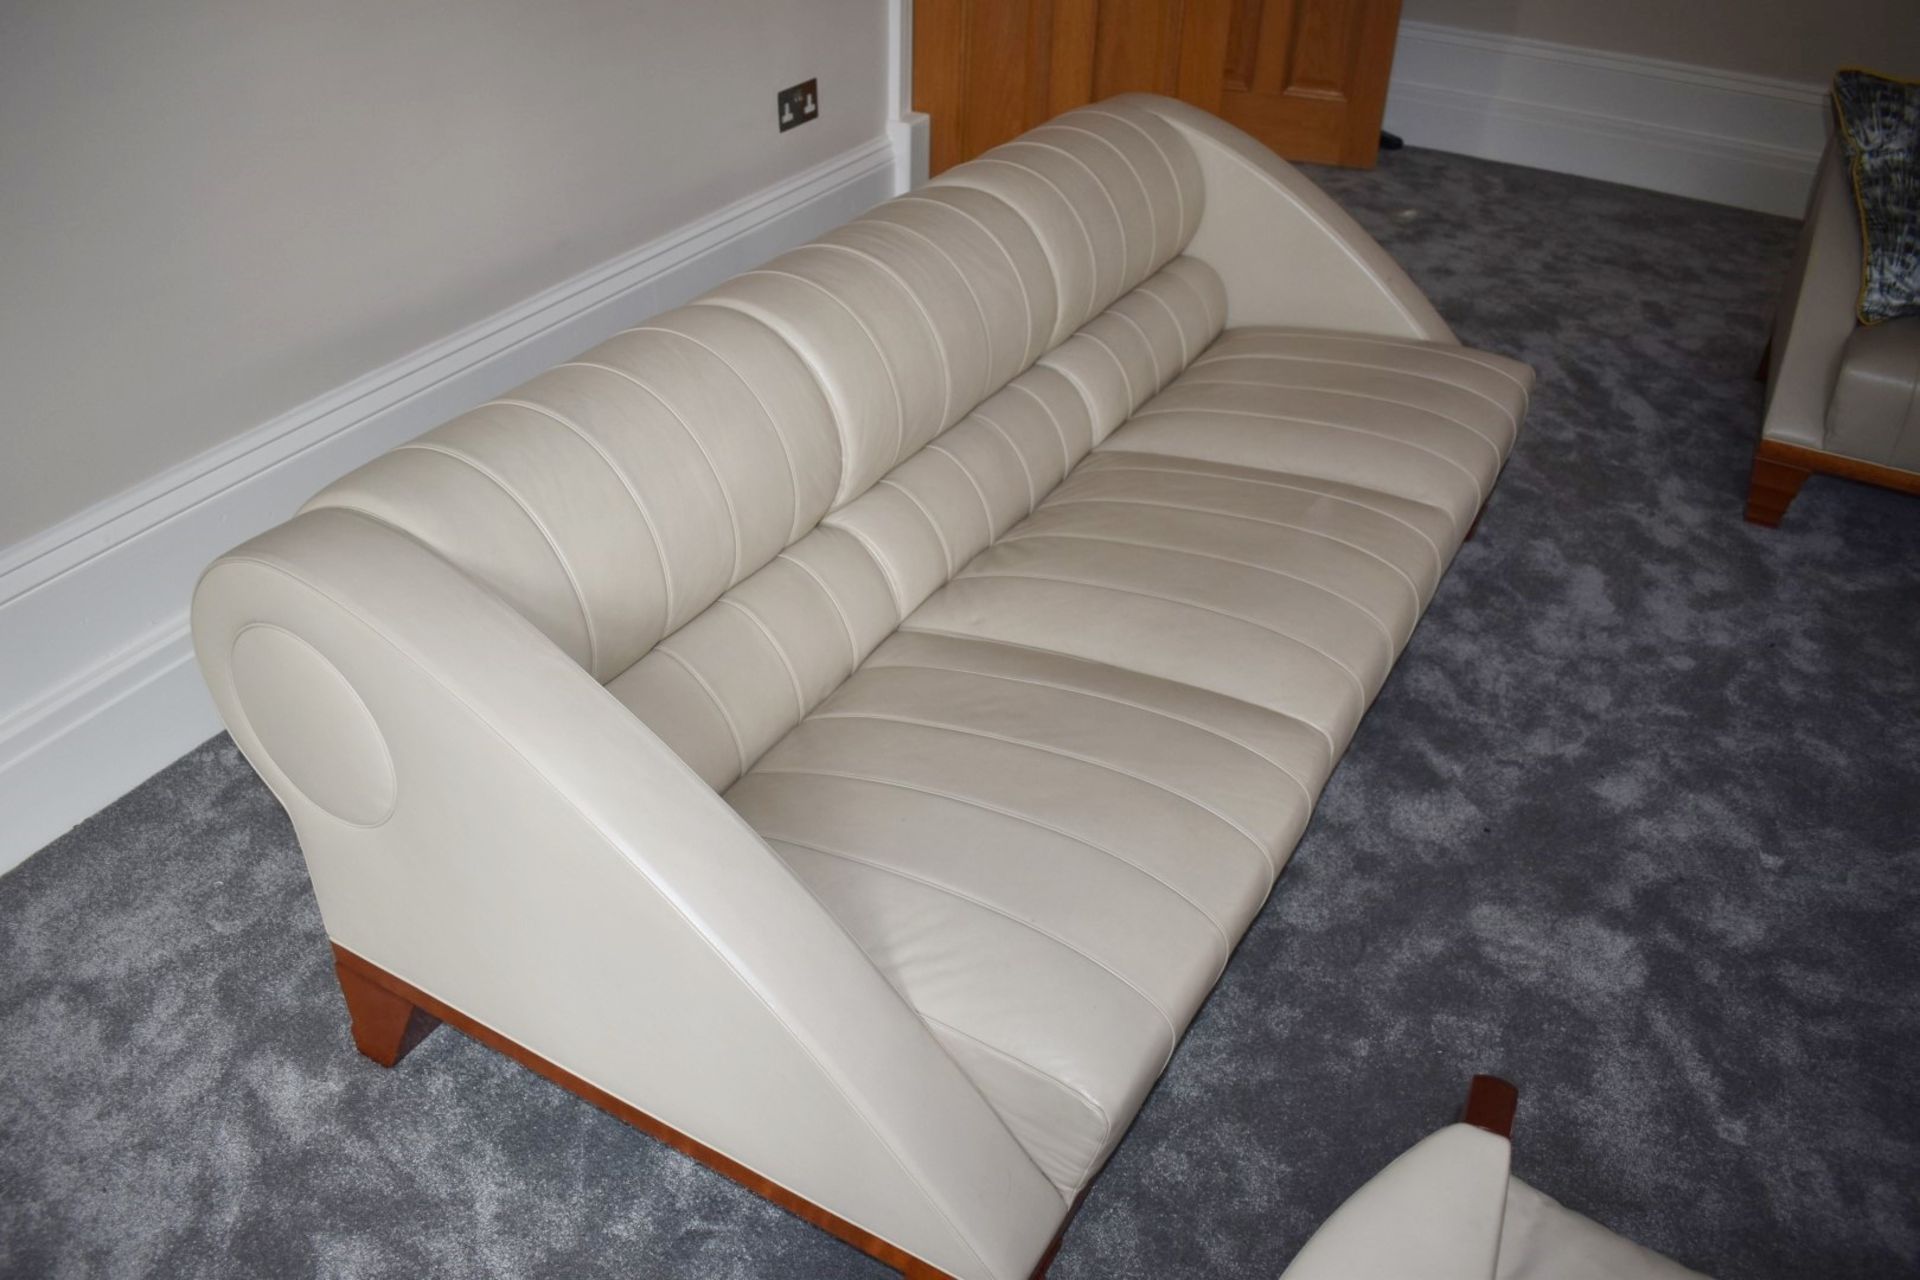 1 x Giorgetti Aries Three Seater Leather Sofa - Designed by Leon Krier - Contemporary Sofa - Image 4 of 10